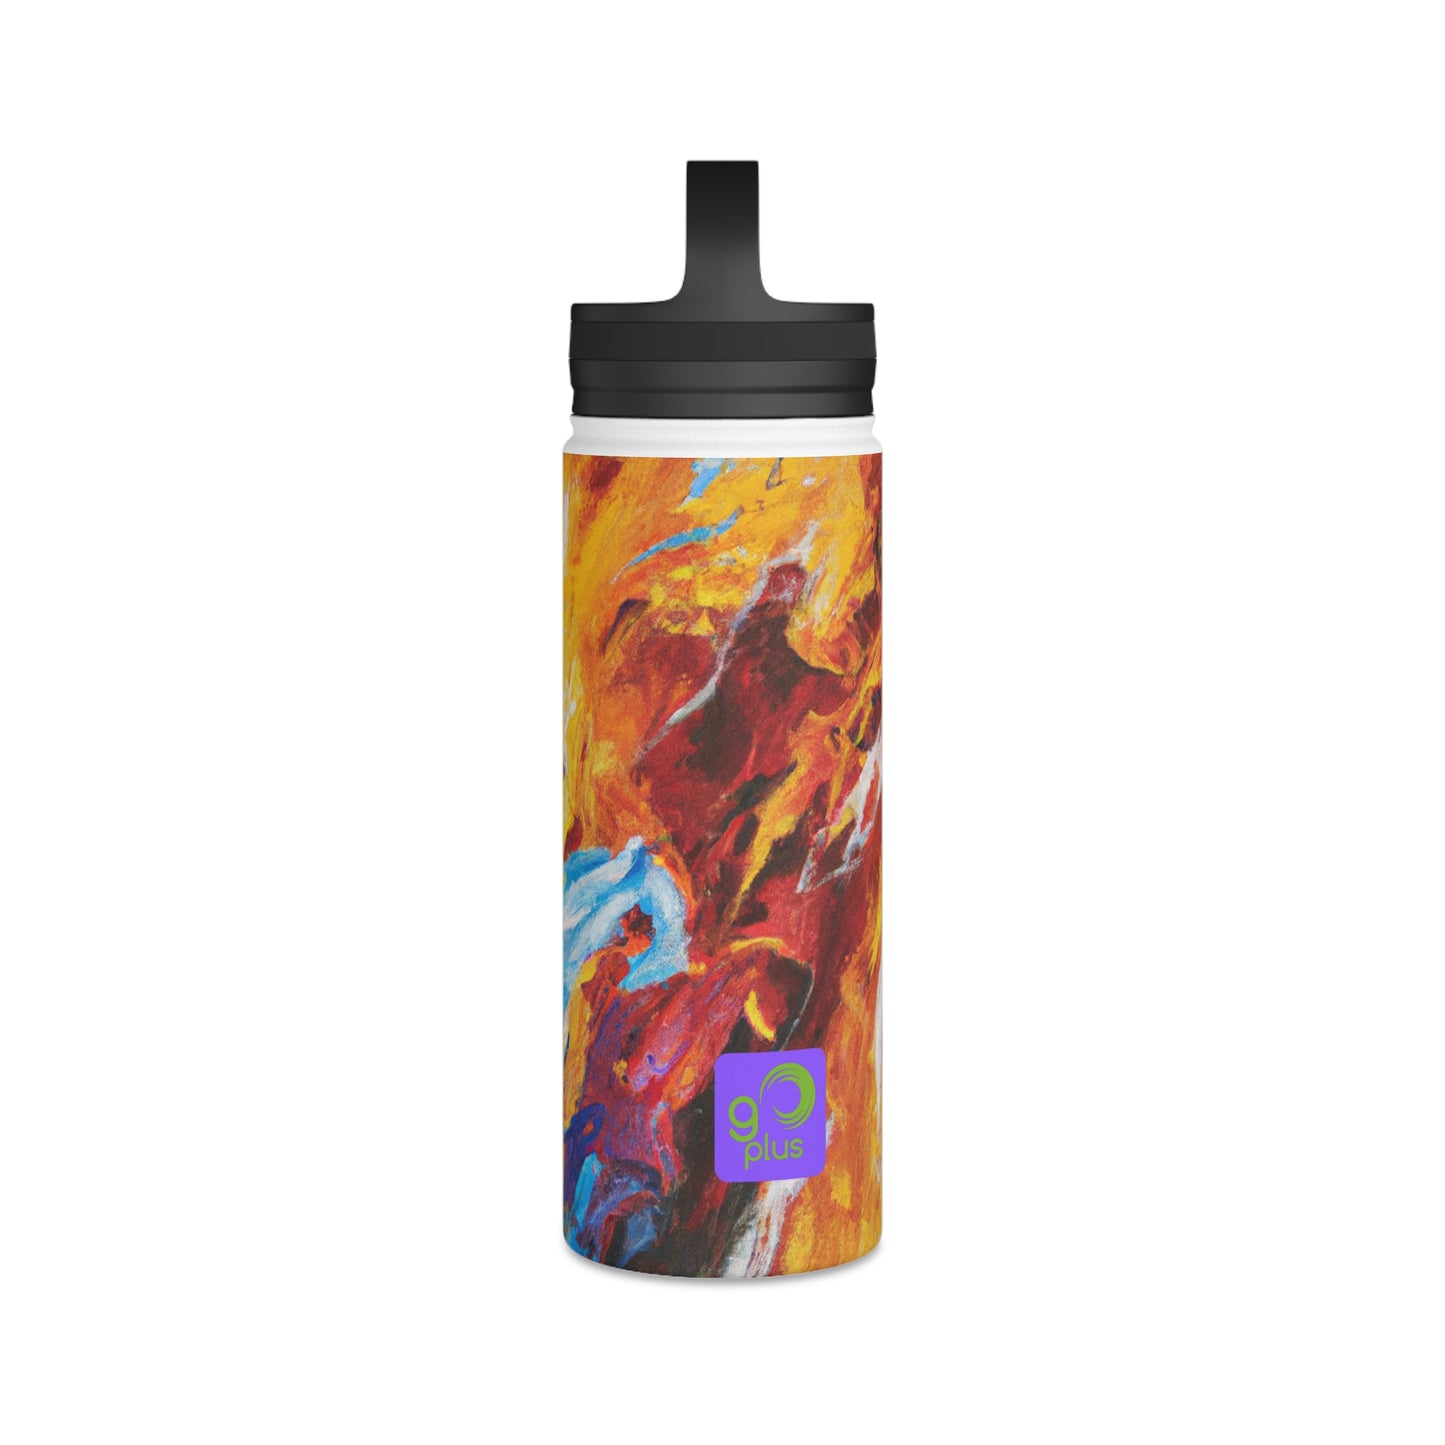 "Dynamic Sporting Vibrance" - Go Plus Stainless Steel Water Bottle, Handle Lid